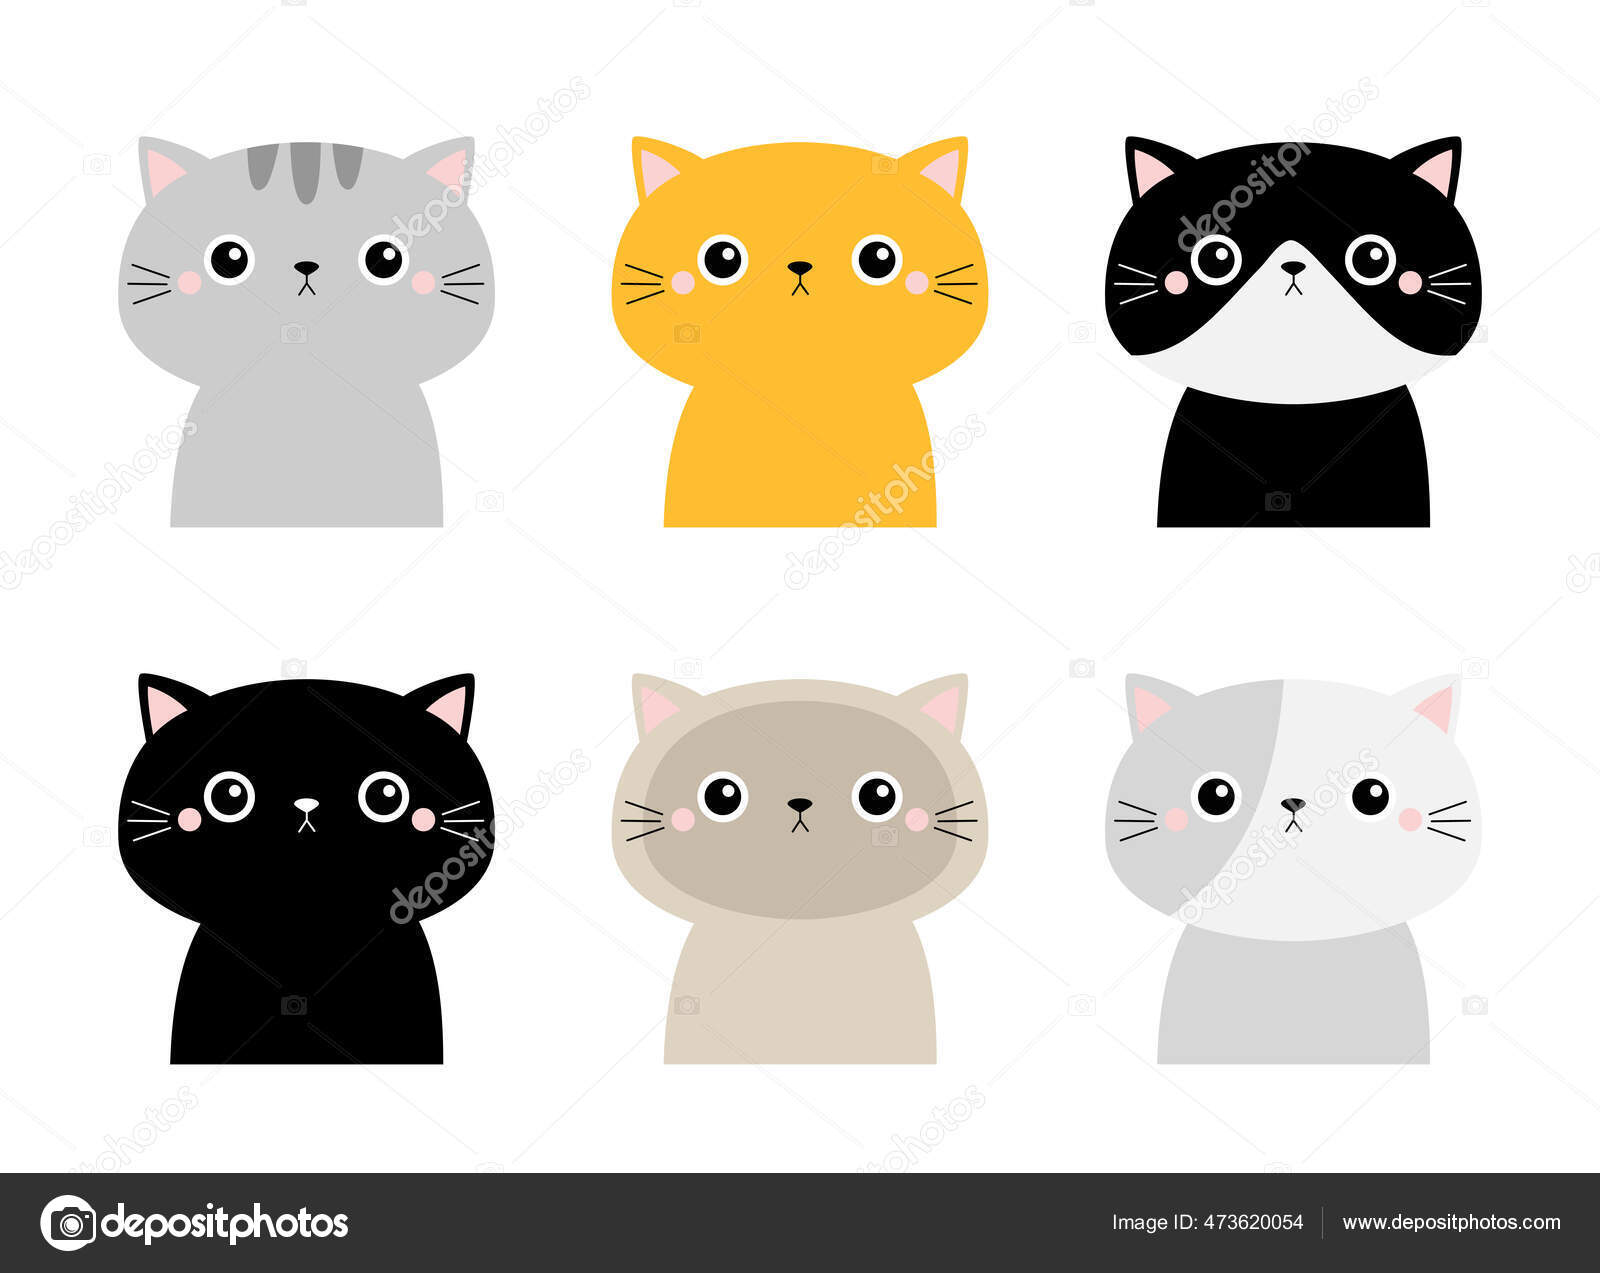 Cute Black Cat Icons Or Symbols Vector Set Collection Of Funny